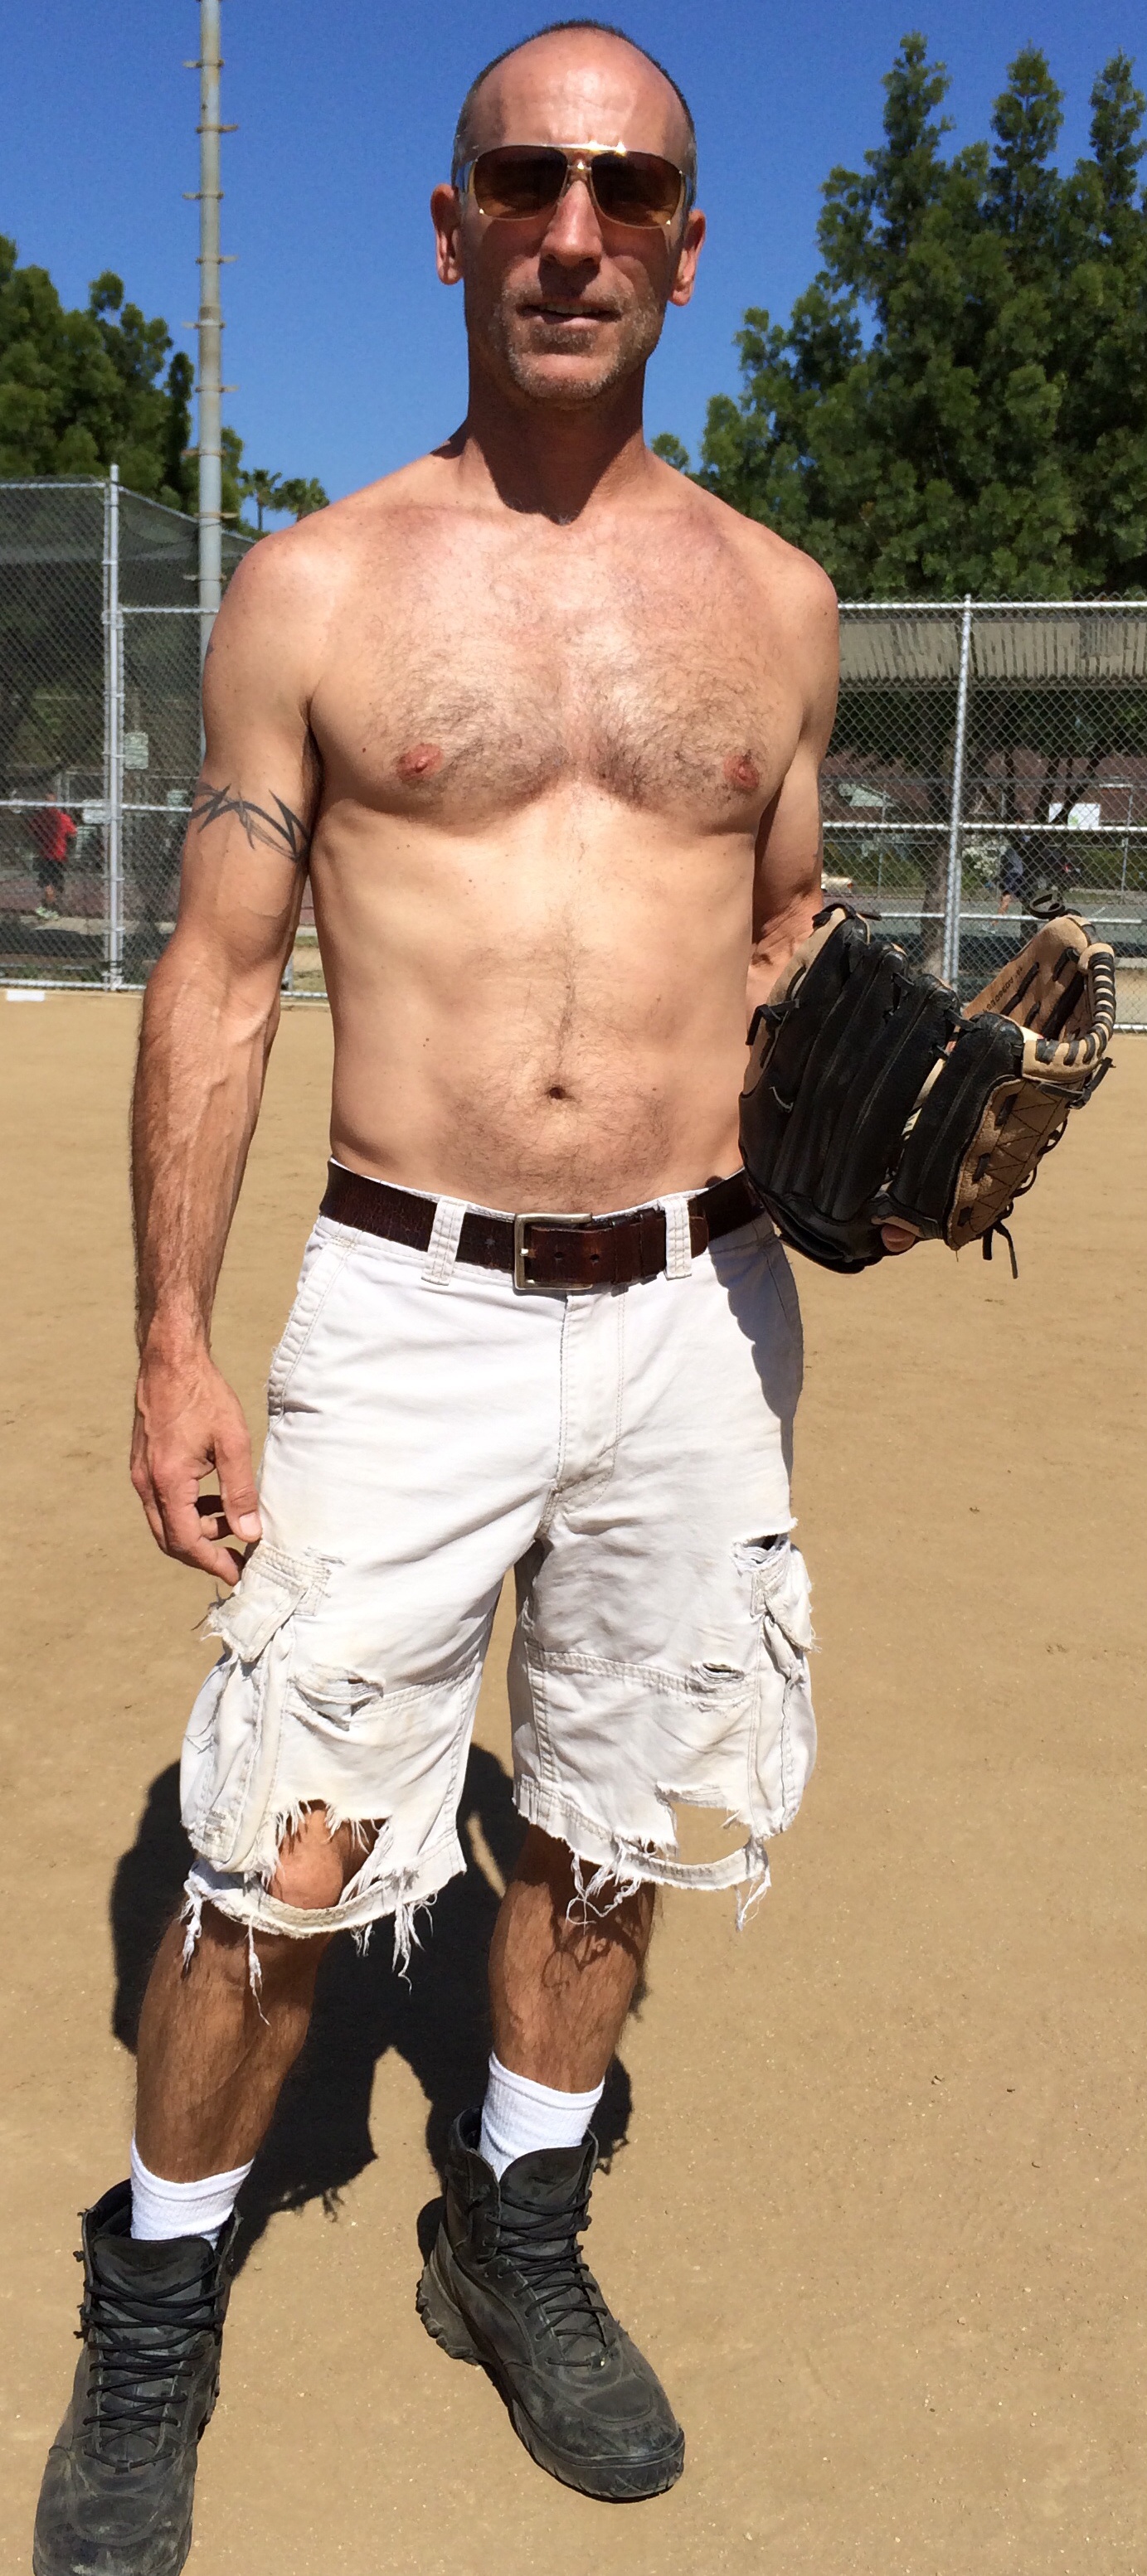 Baseball practice with son April 2014